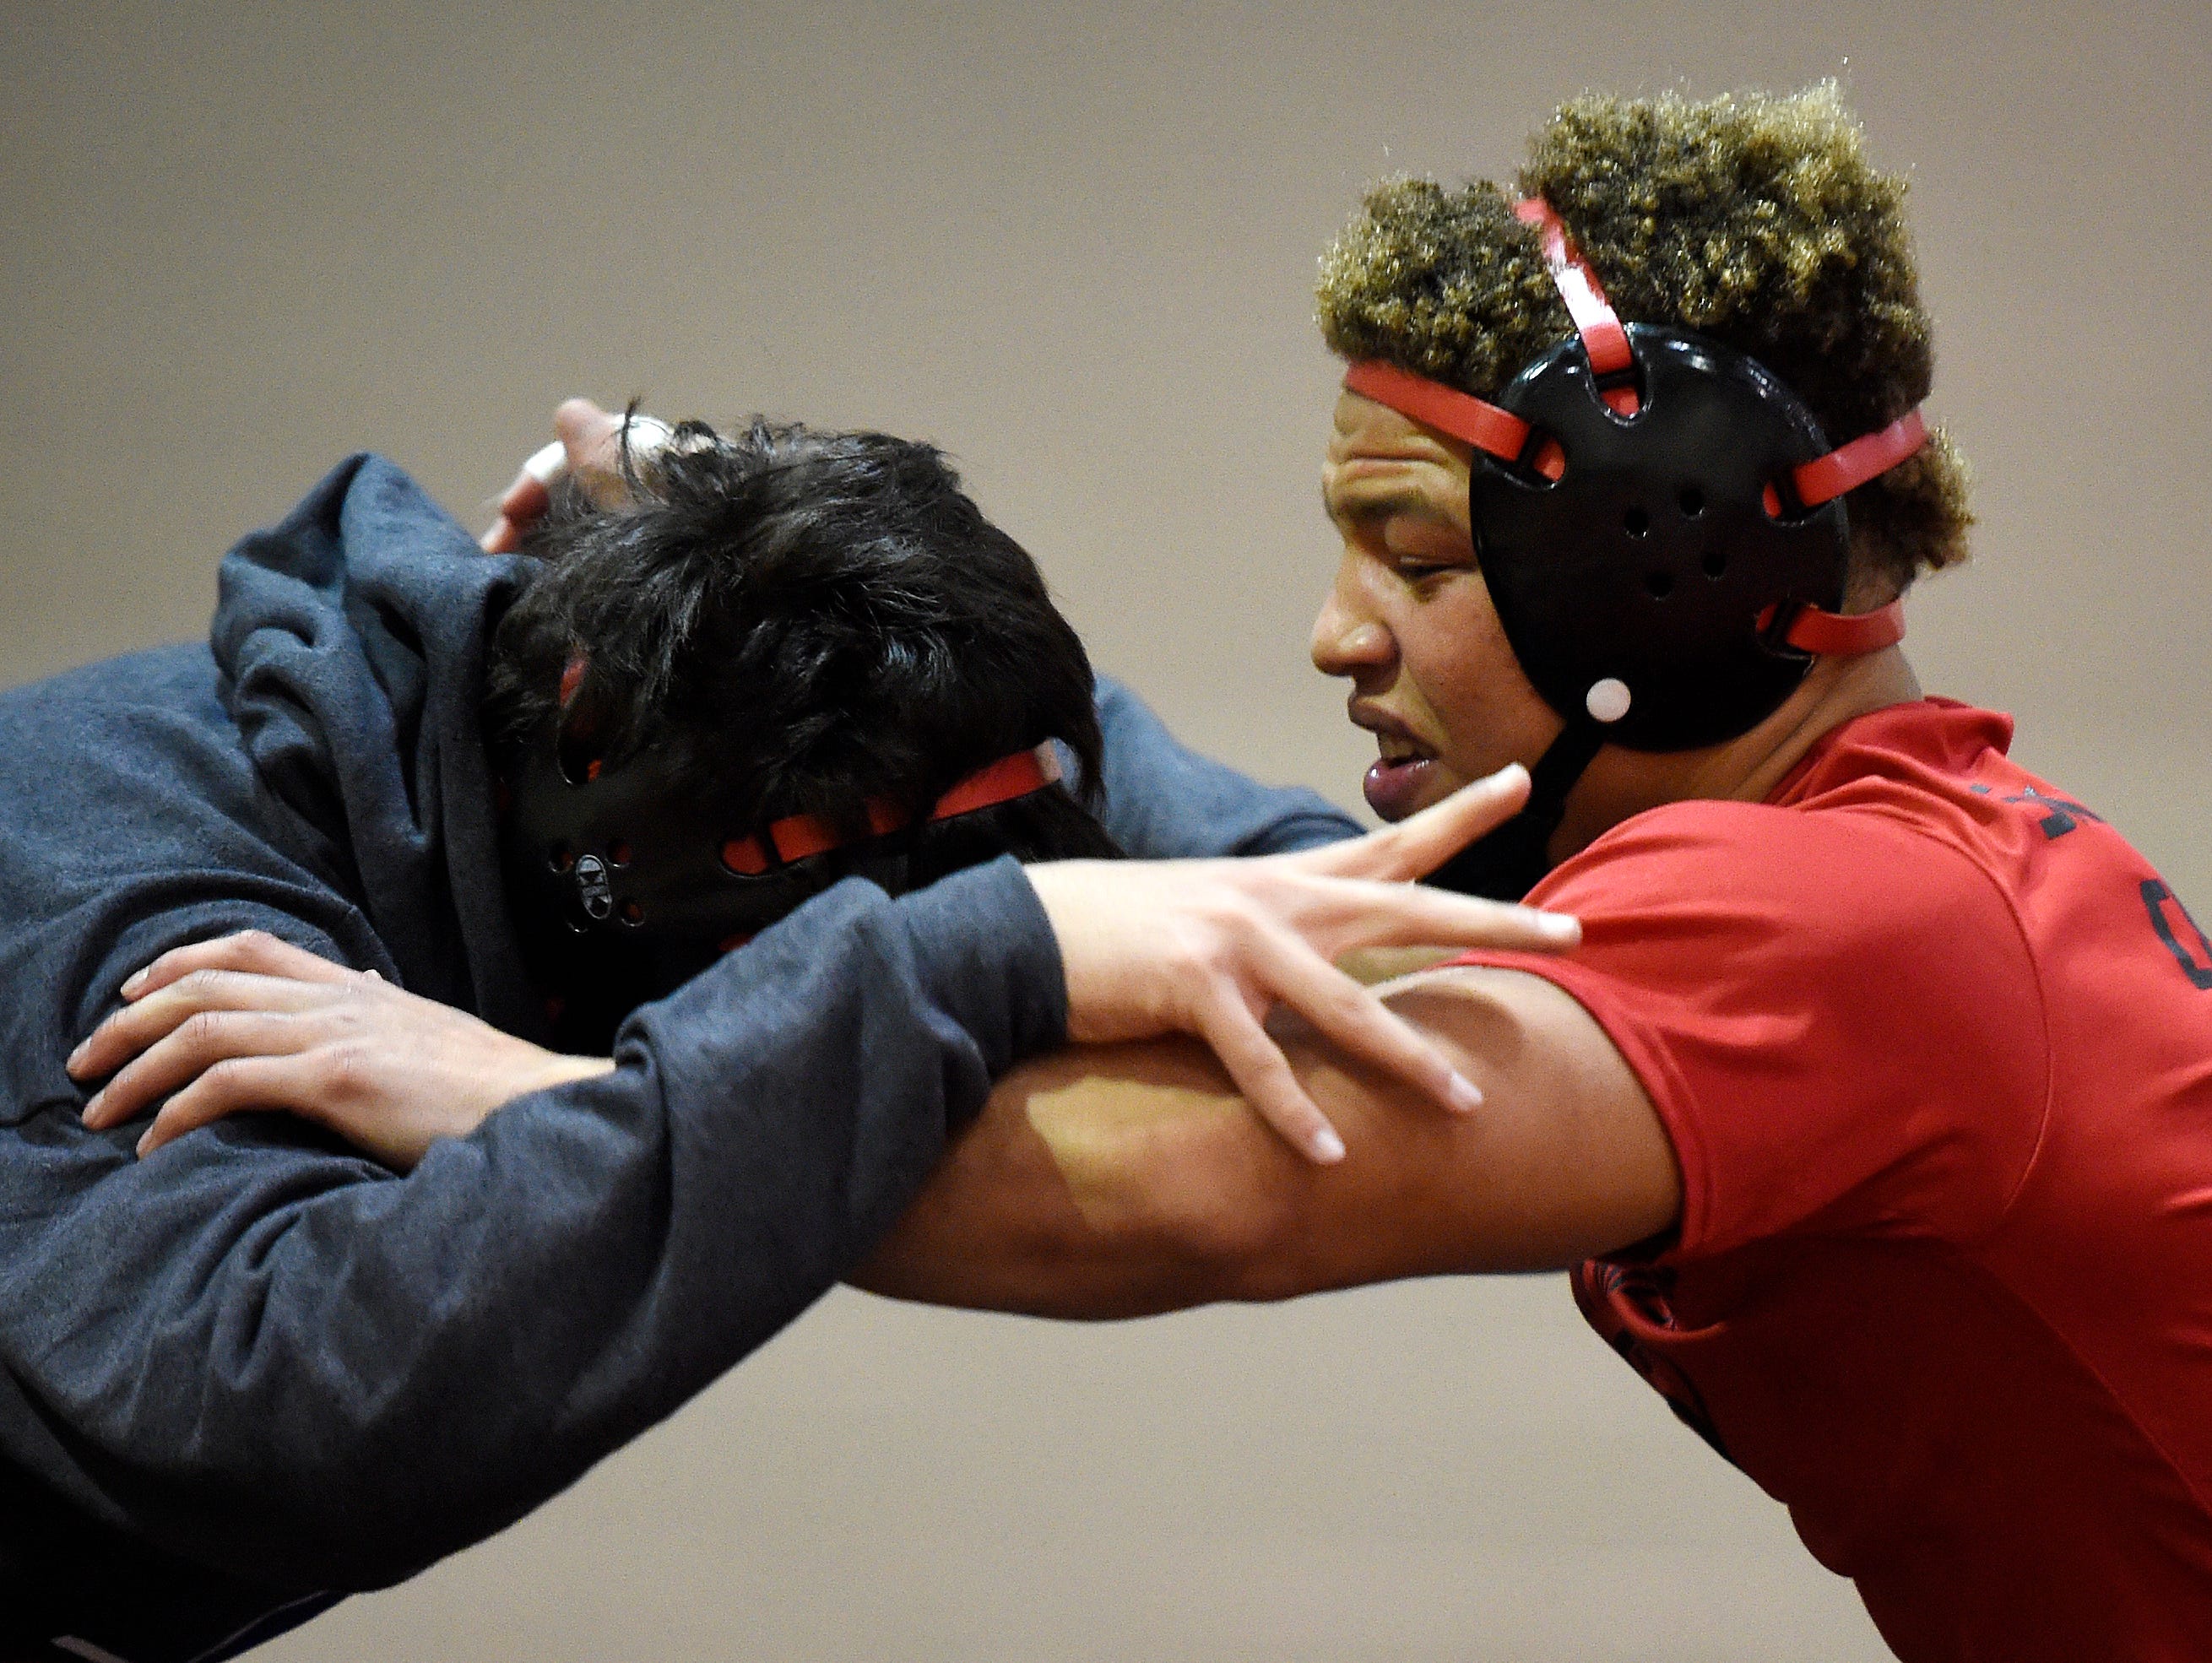 Ravenwood wrestler Chris Rowland, right, trains with teammate Rohan Nandwani, left, during practice at Ravenwood High School, Wednesday, Jan. 27, 2016, in Brentwood, Tenn.